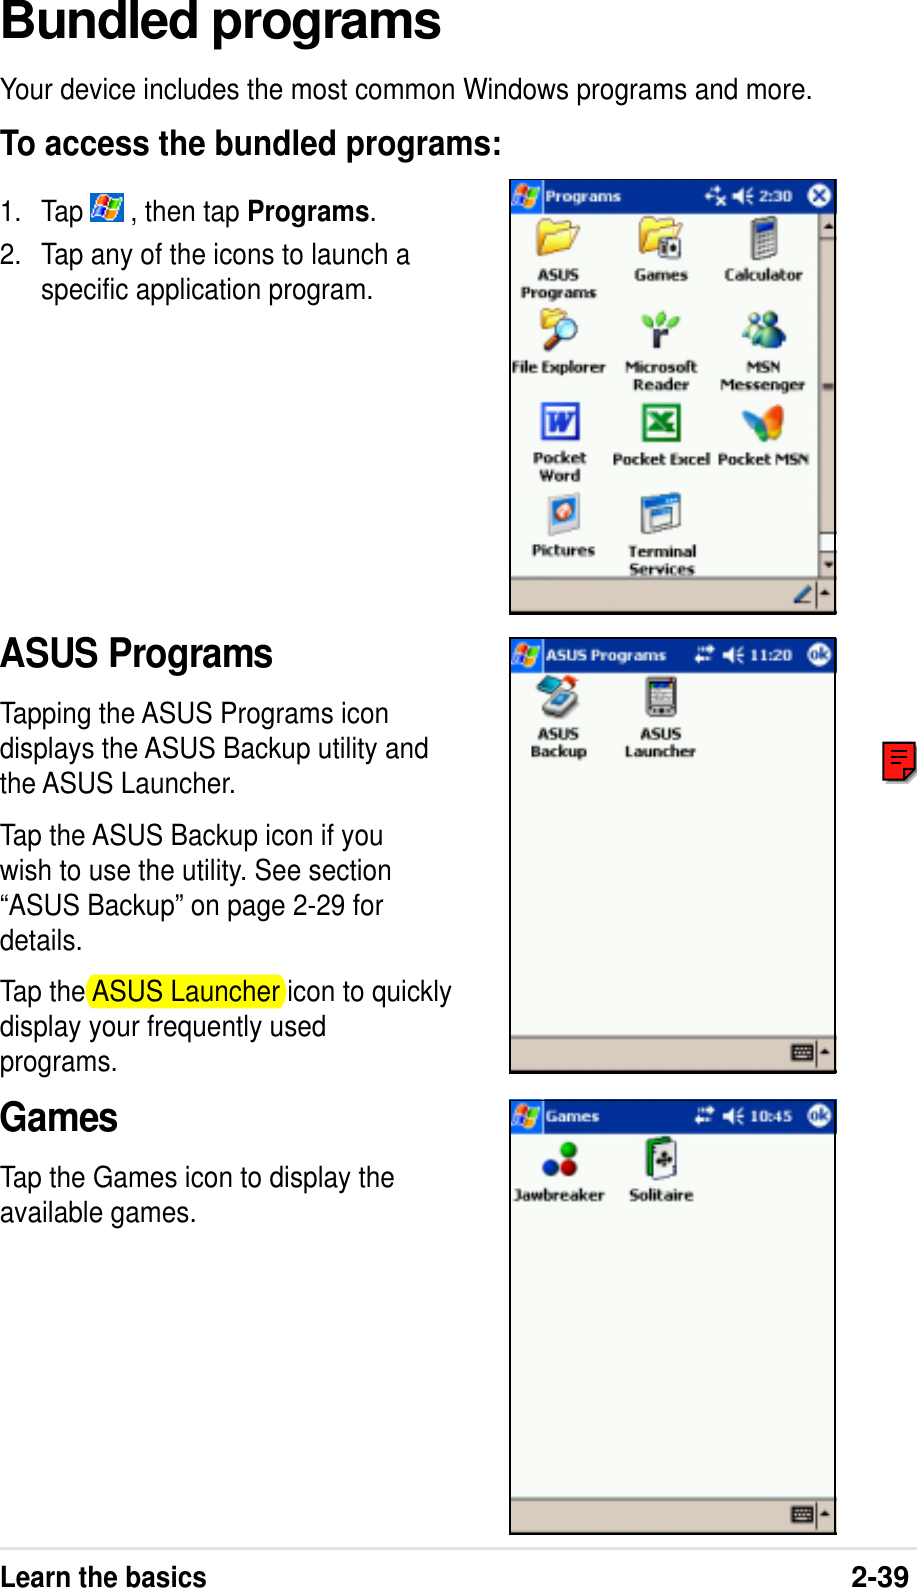 Learn the basics2-39Bundled programsYour device includes the most common Windows programs and more.To access the bundled programs:1. Tap   , then tap Programs.2. Tap any of the icons to launch aspecific application program.ASUS ProgramsTapping the ASUS Programs icondisplays the ASUS Backup utility andthe ASUS Launcher.Tap the ASUS Backup icon if youwish to use the utility. See section“ASUS Backup” on page 2-29 fordetails.Tap the ASUS Launcher icon to quicklydisplay your frequently usedprograms.GamesTap the Games icon to display theavailable games.